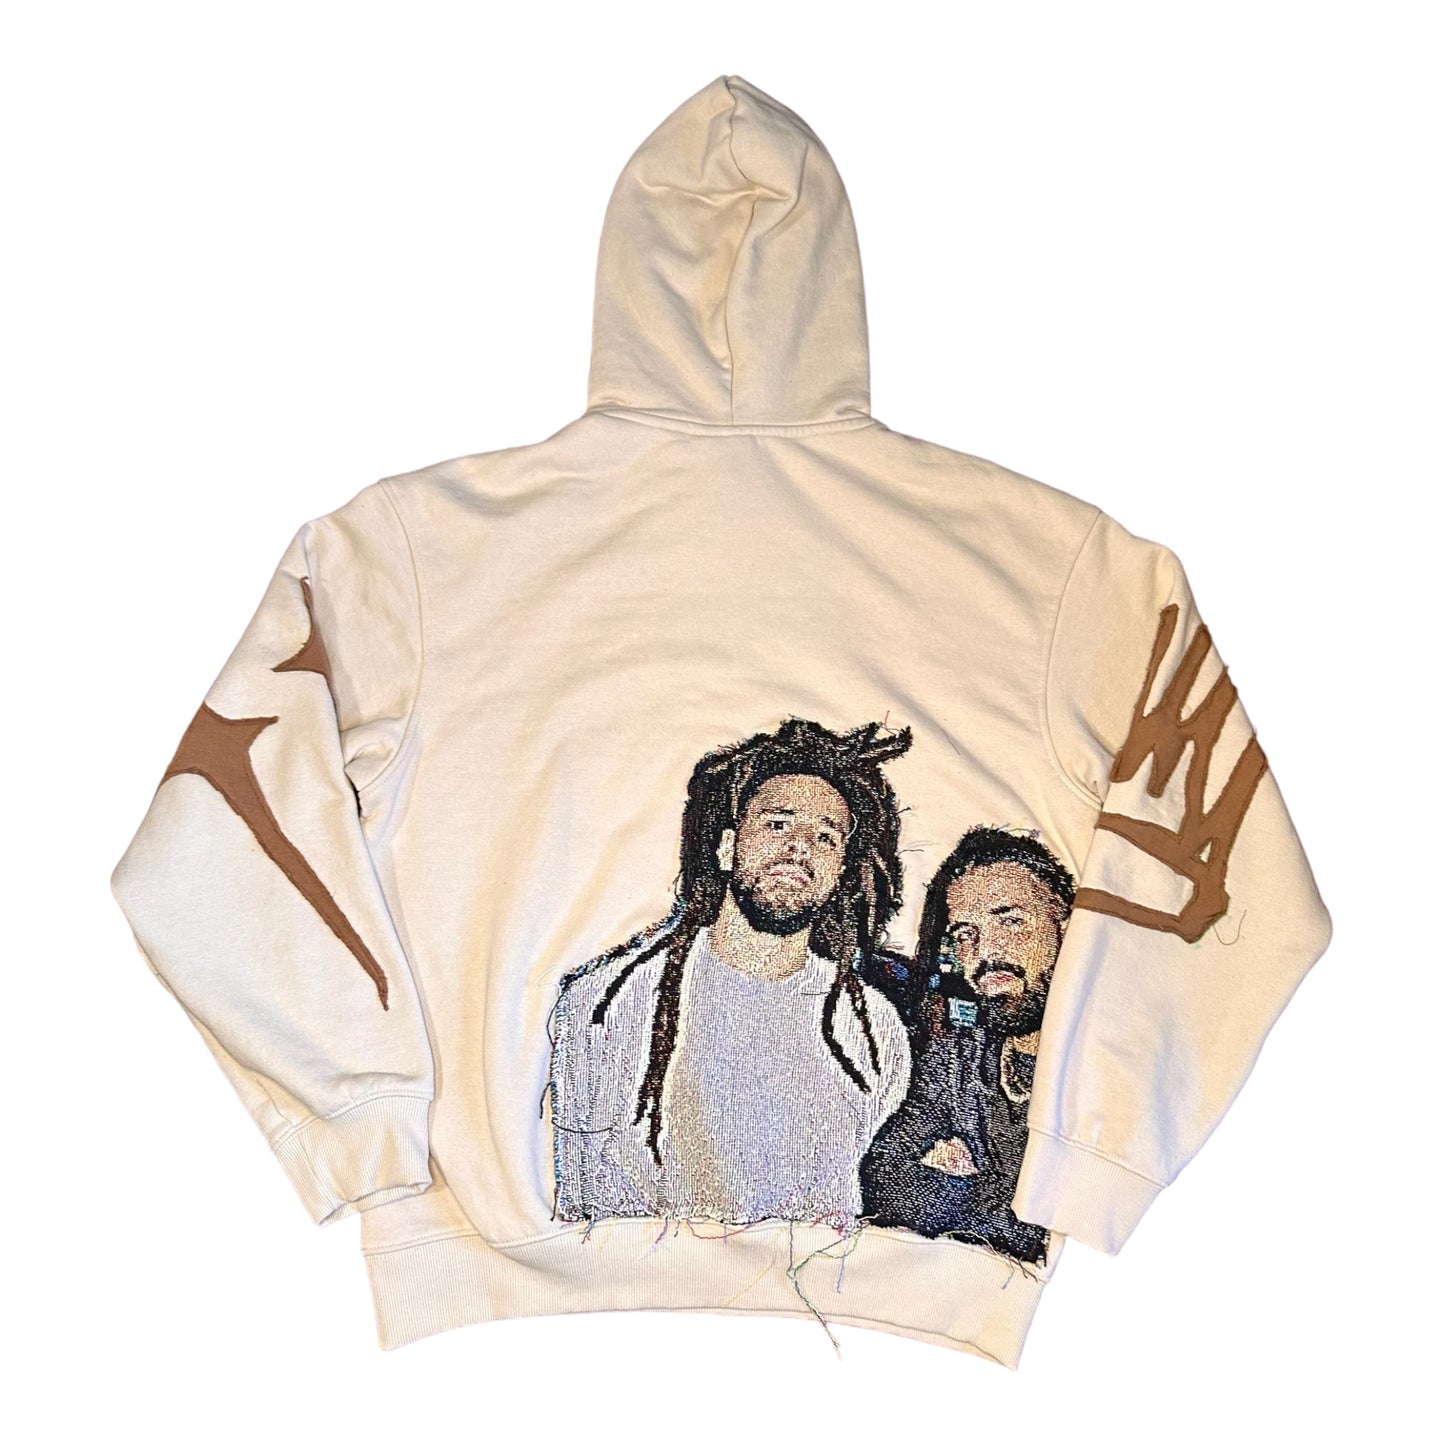 “Big As The What?” J.Cole and Drake Hoodie